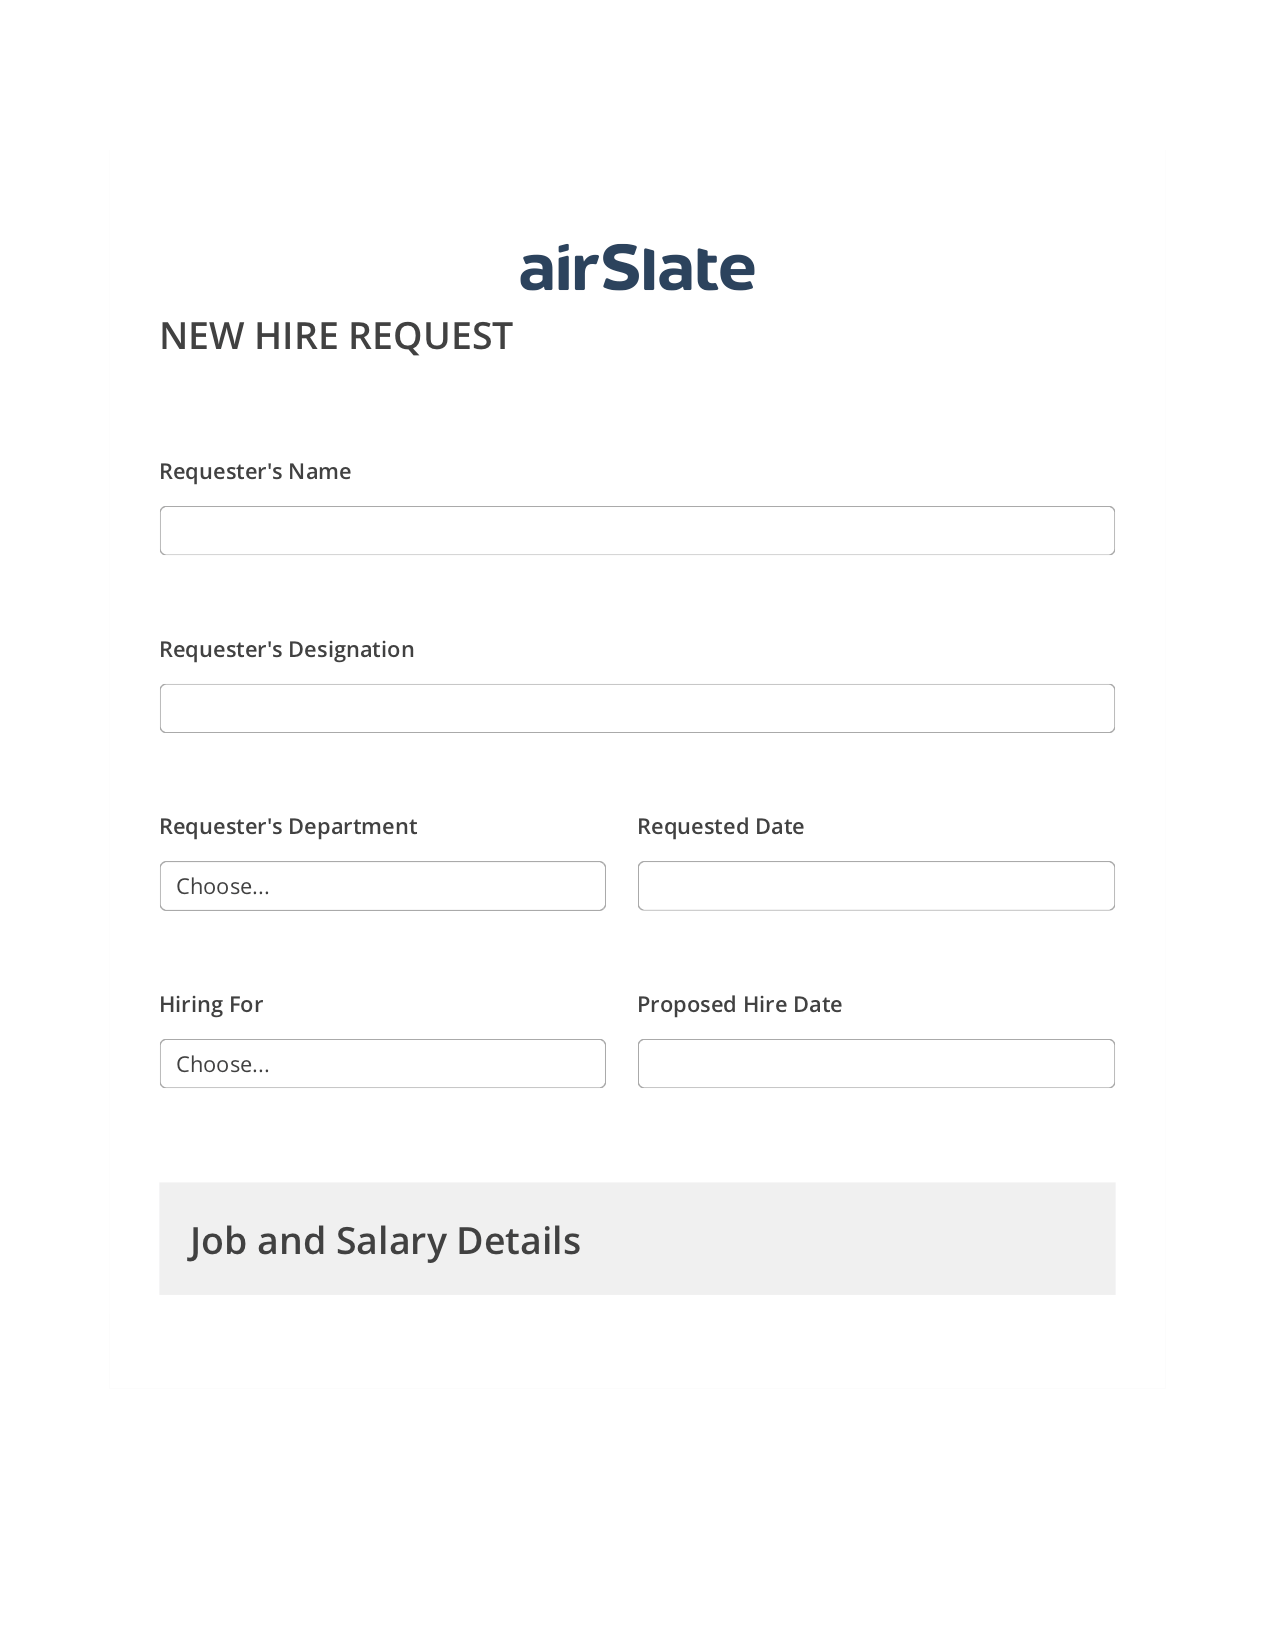 Hiring Request Workflow Pre-fill from Excel Spreadsheet Bot, Lock the Slate Bot, Export to WebMerge Bot